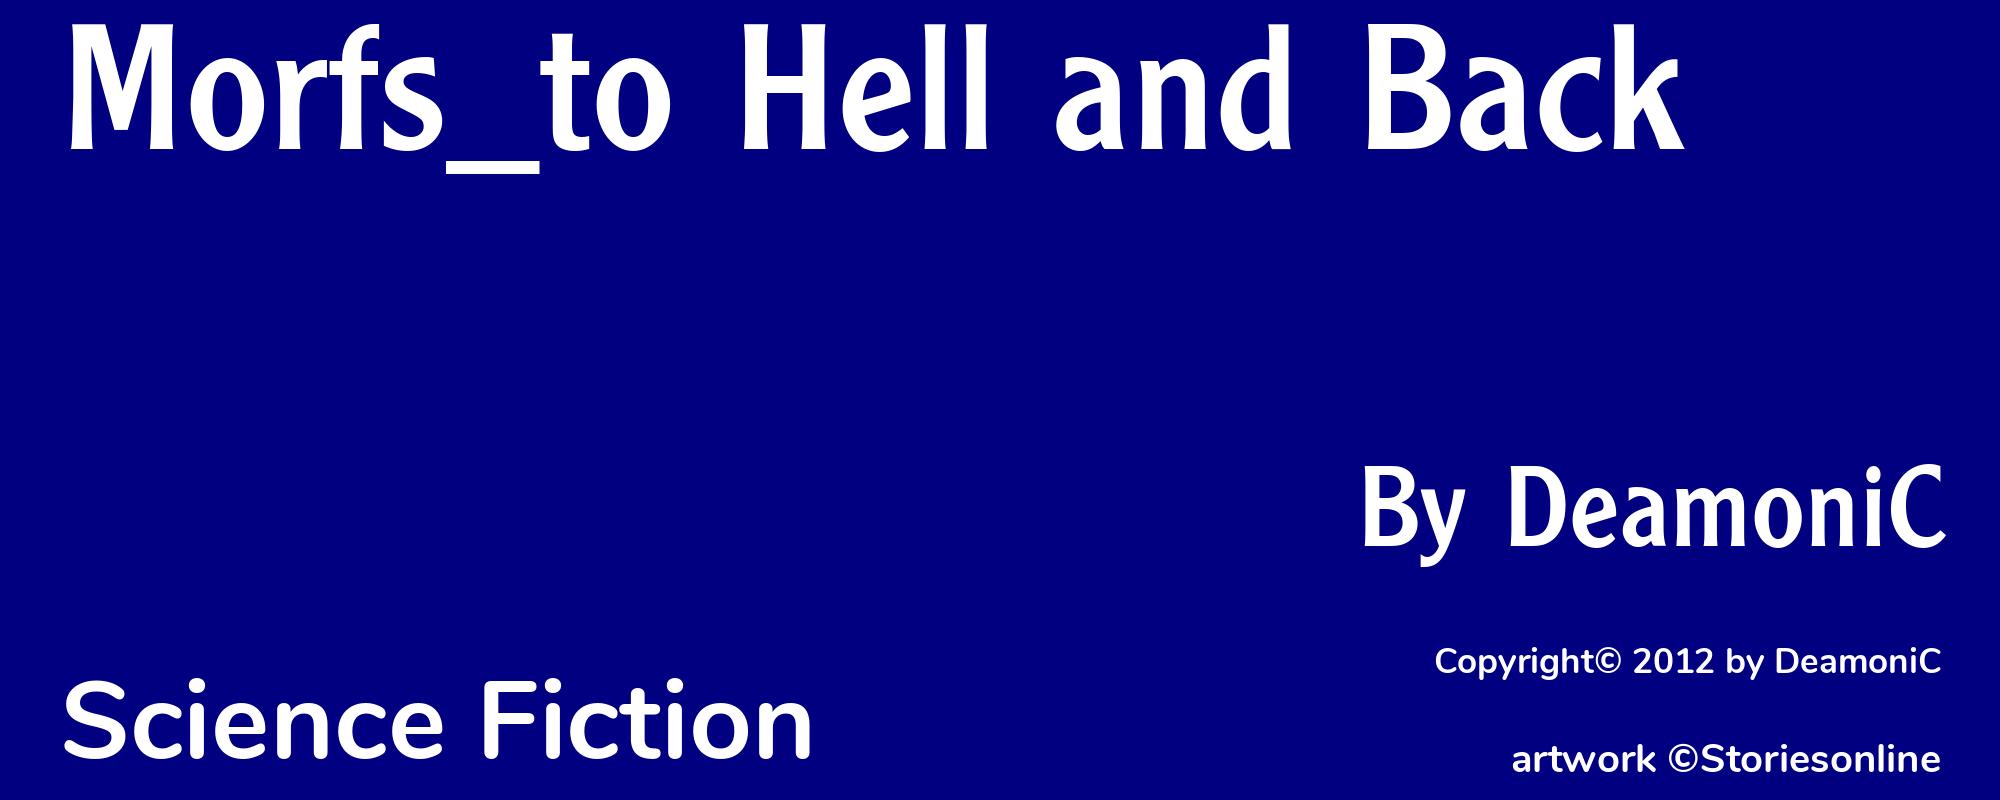 Morfs_to Hell and Back - Cover